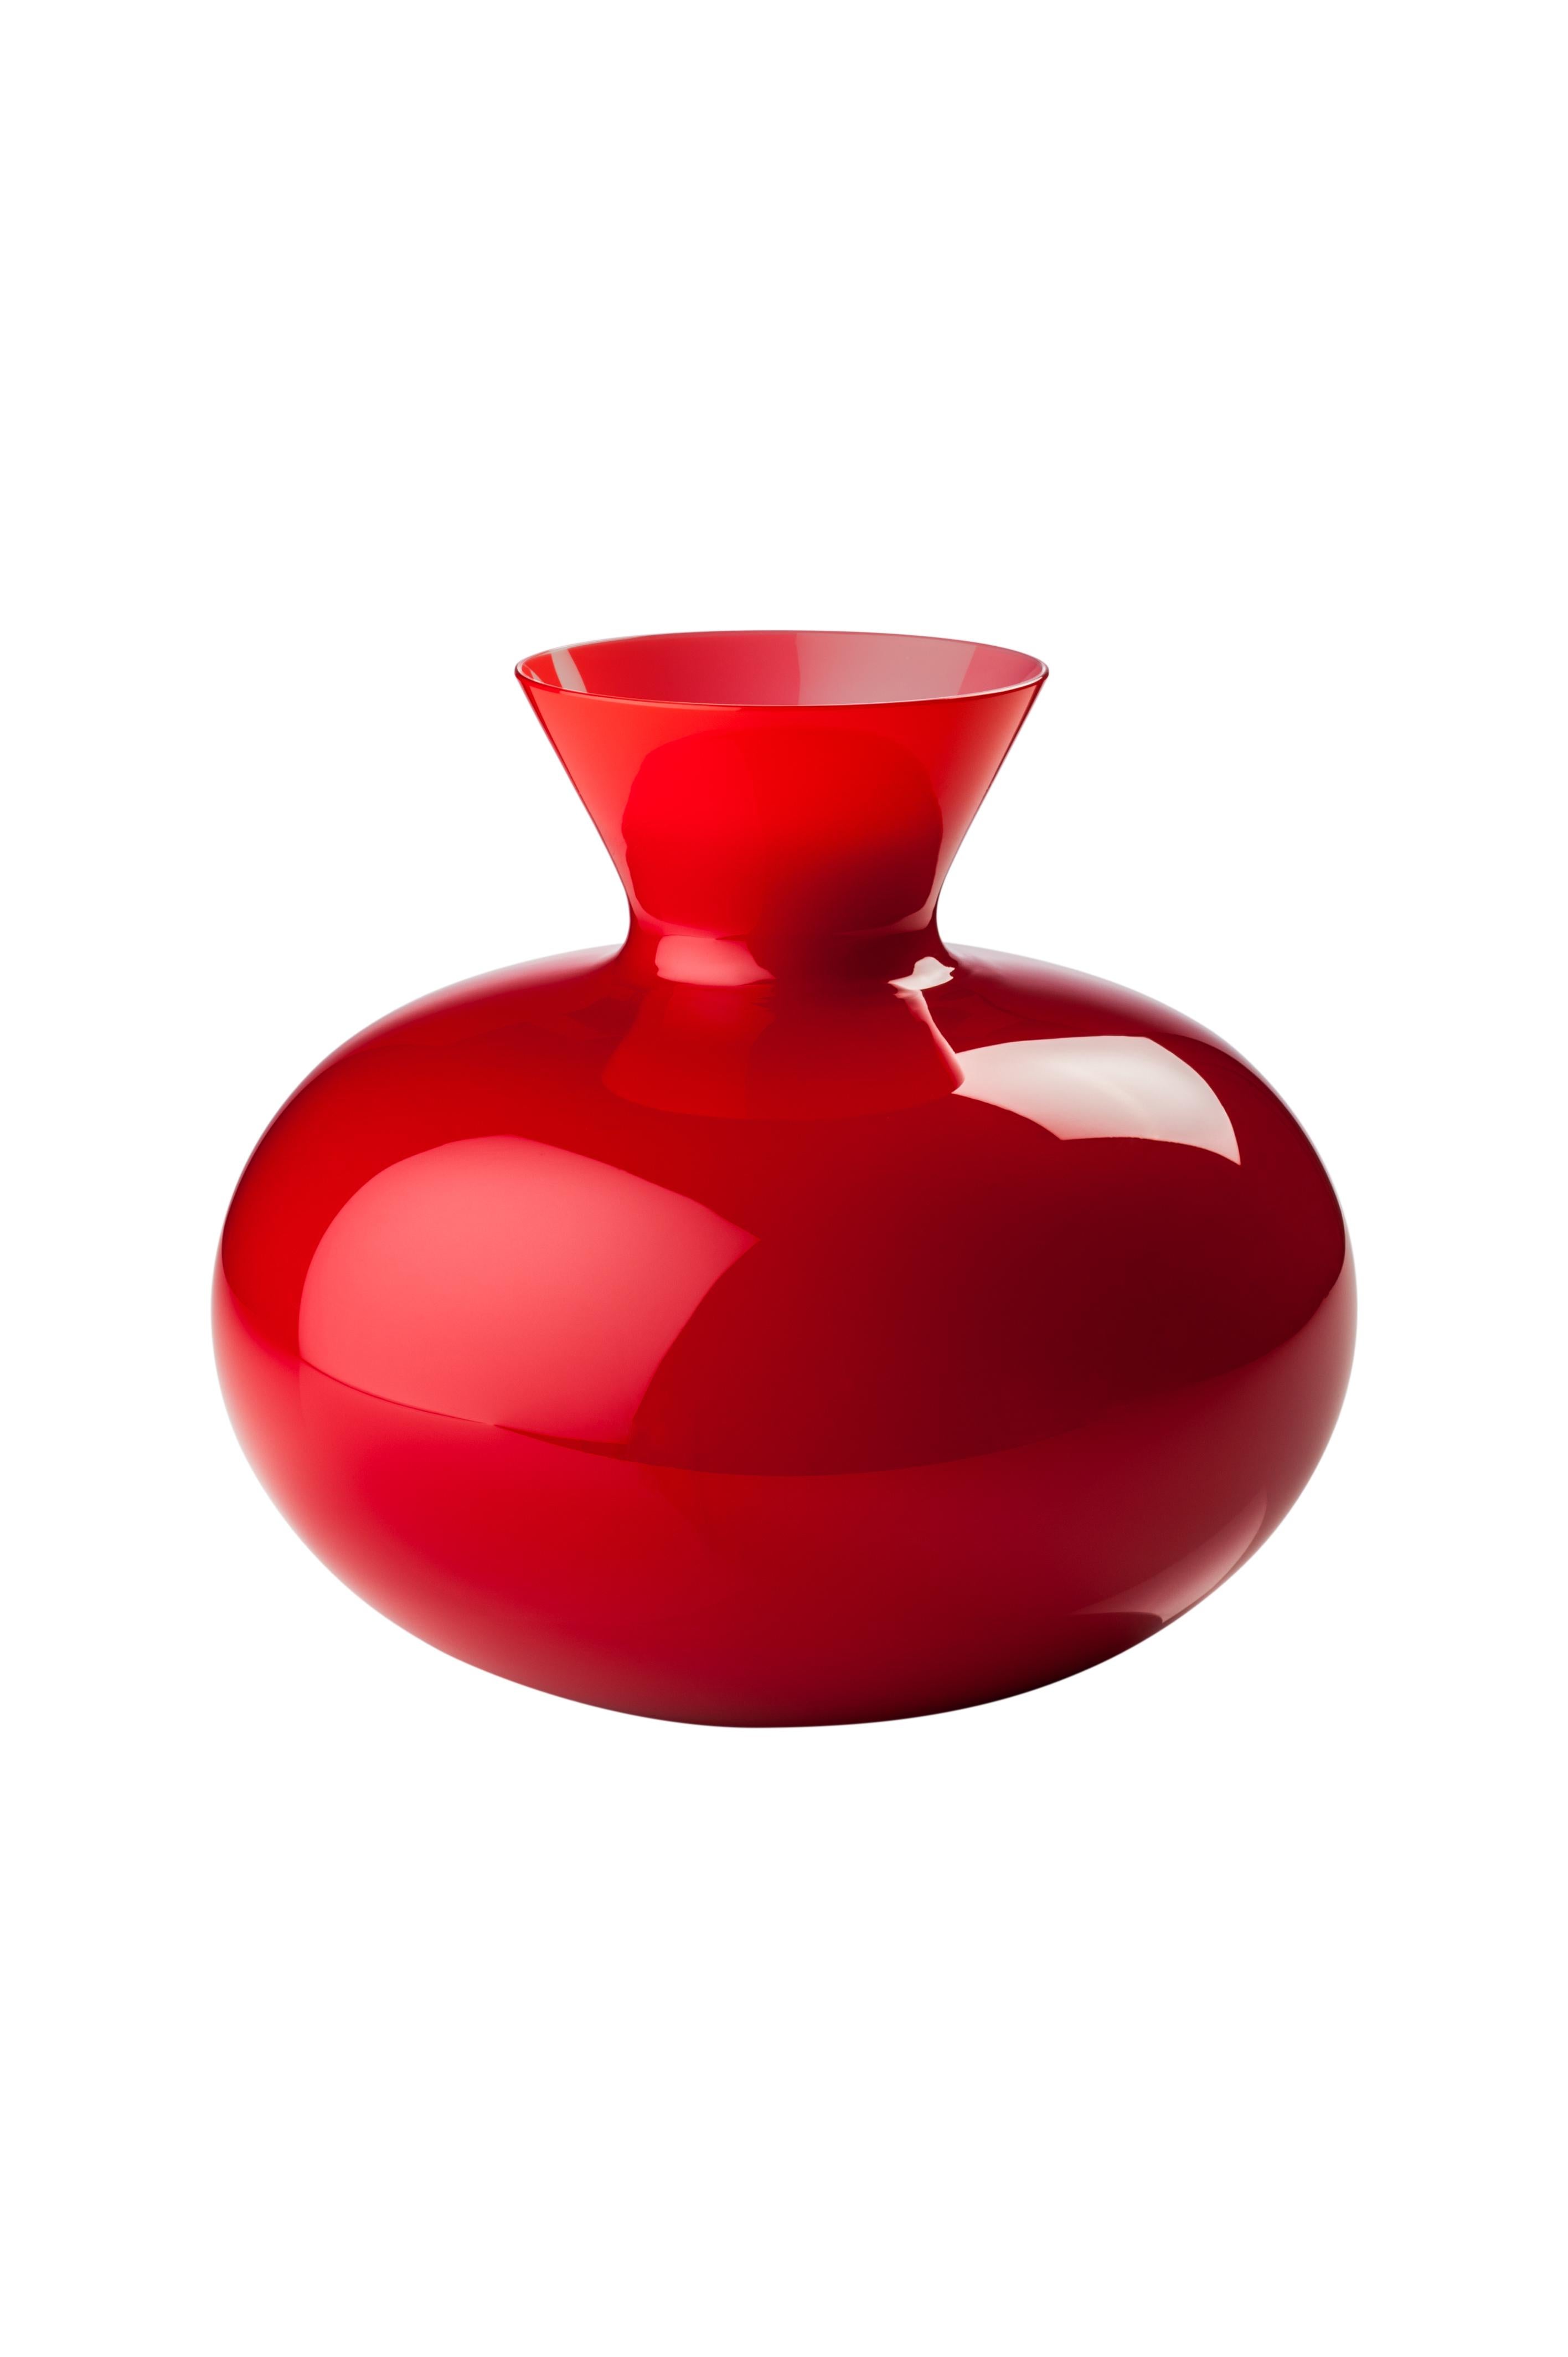 Venini glass vase with round body and angular shaped neck in red designed in 2016. Perfect for indoor home decor as container or strong statement piece for any room. Also available in other colors on 1stdibs.

Dimensions: 30 cm diameter x 27 cm